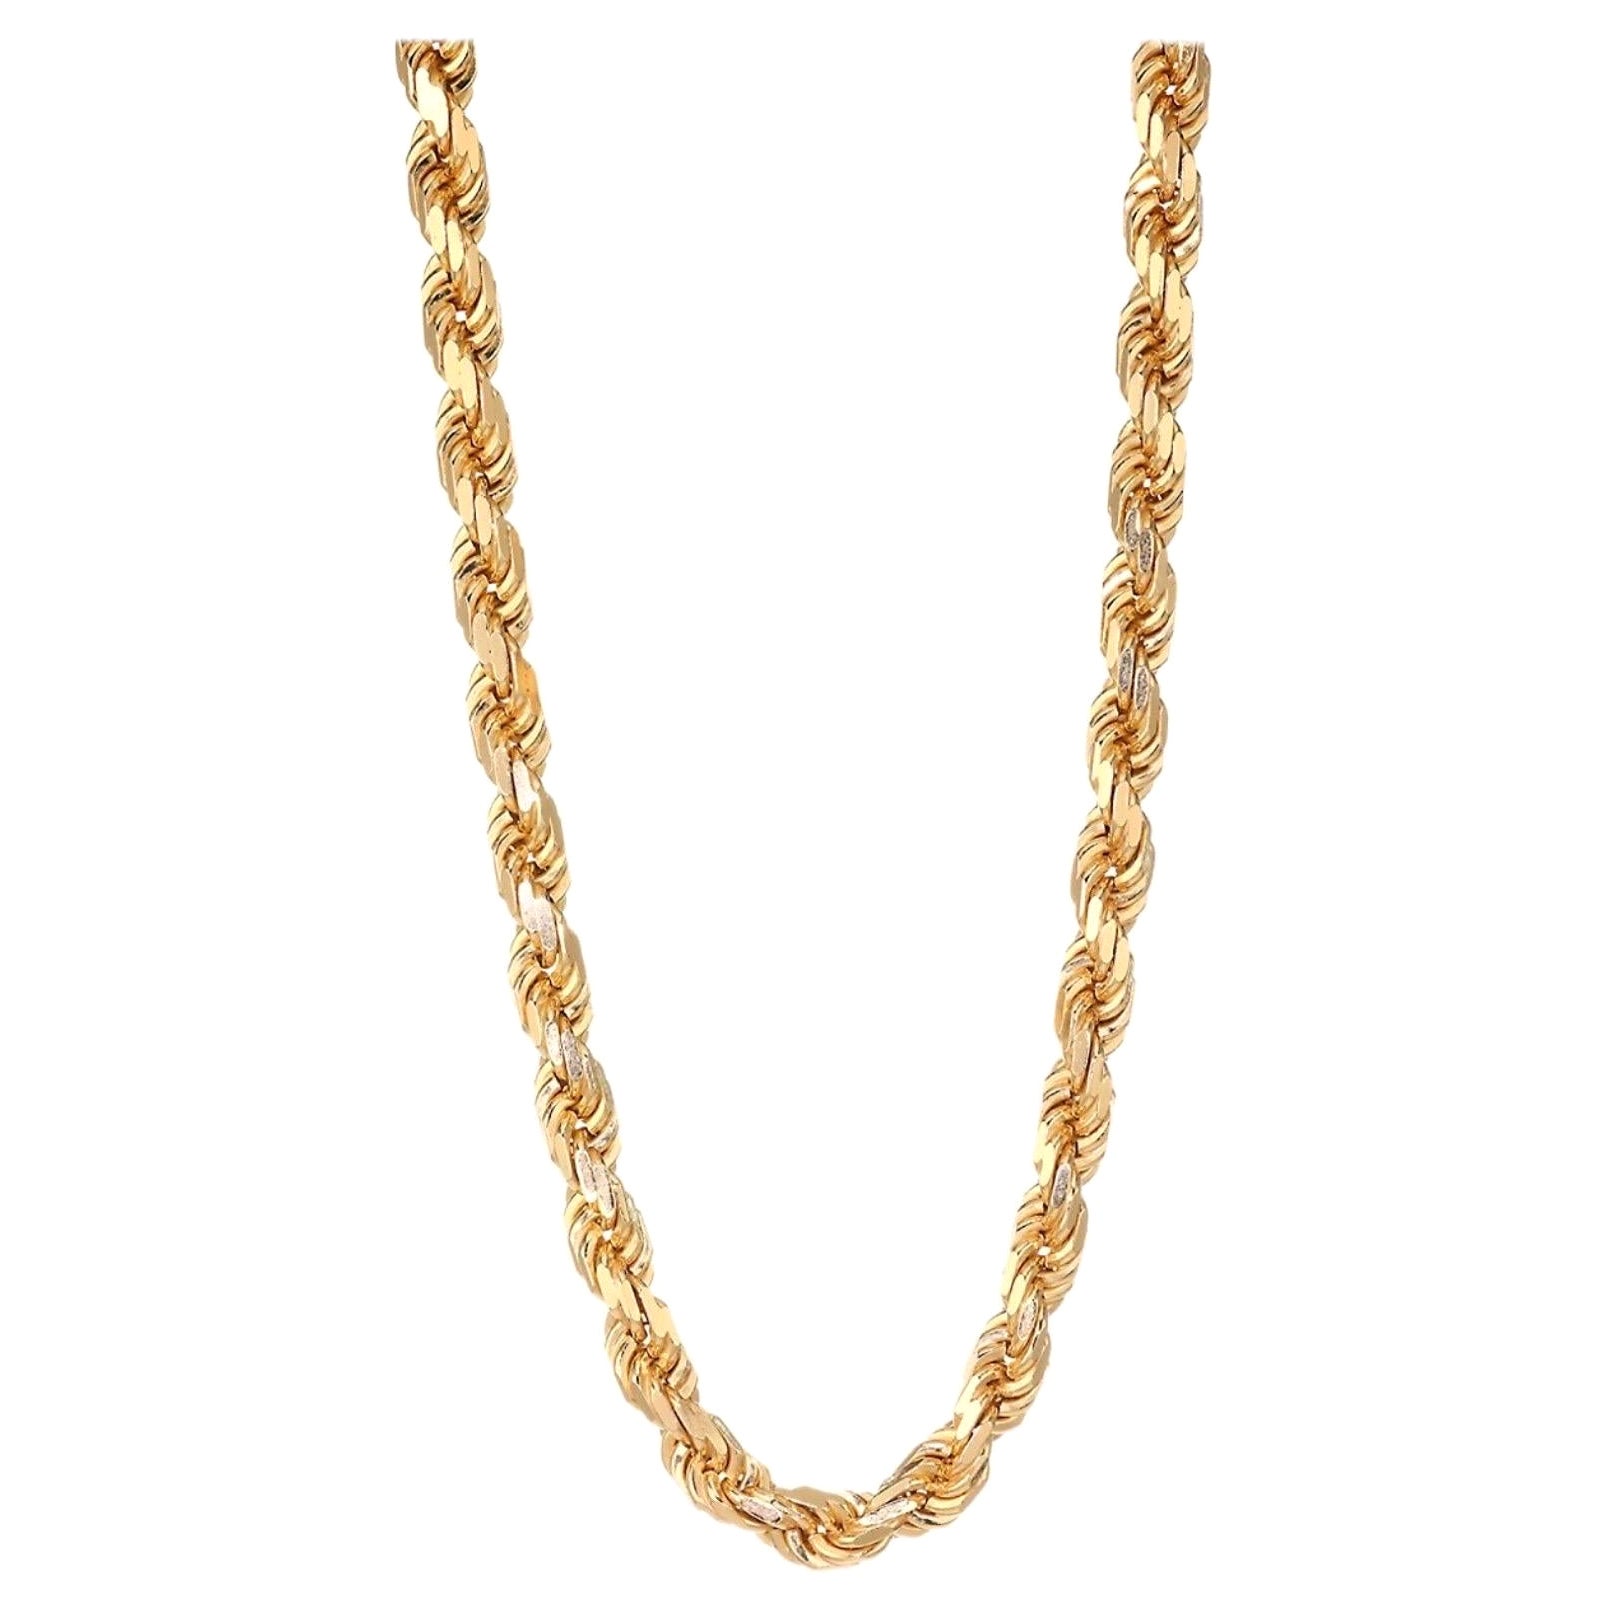 Vintage 14 Karat Yellow Gold 17 Gm, Rope Chain Necklace, 20 